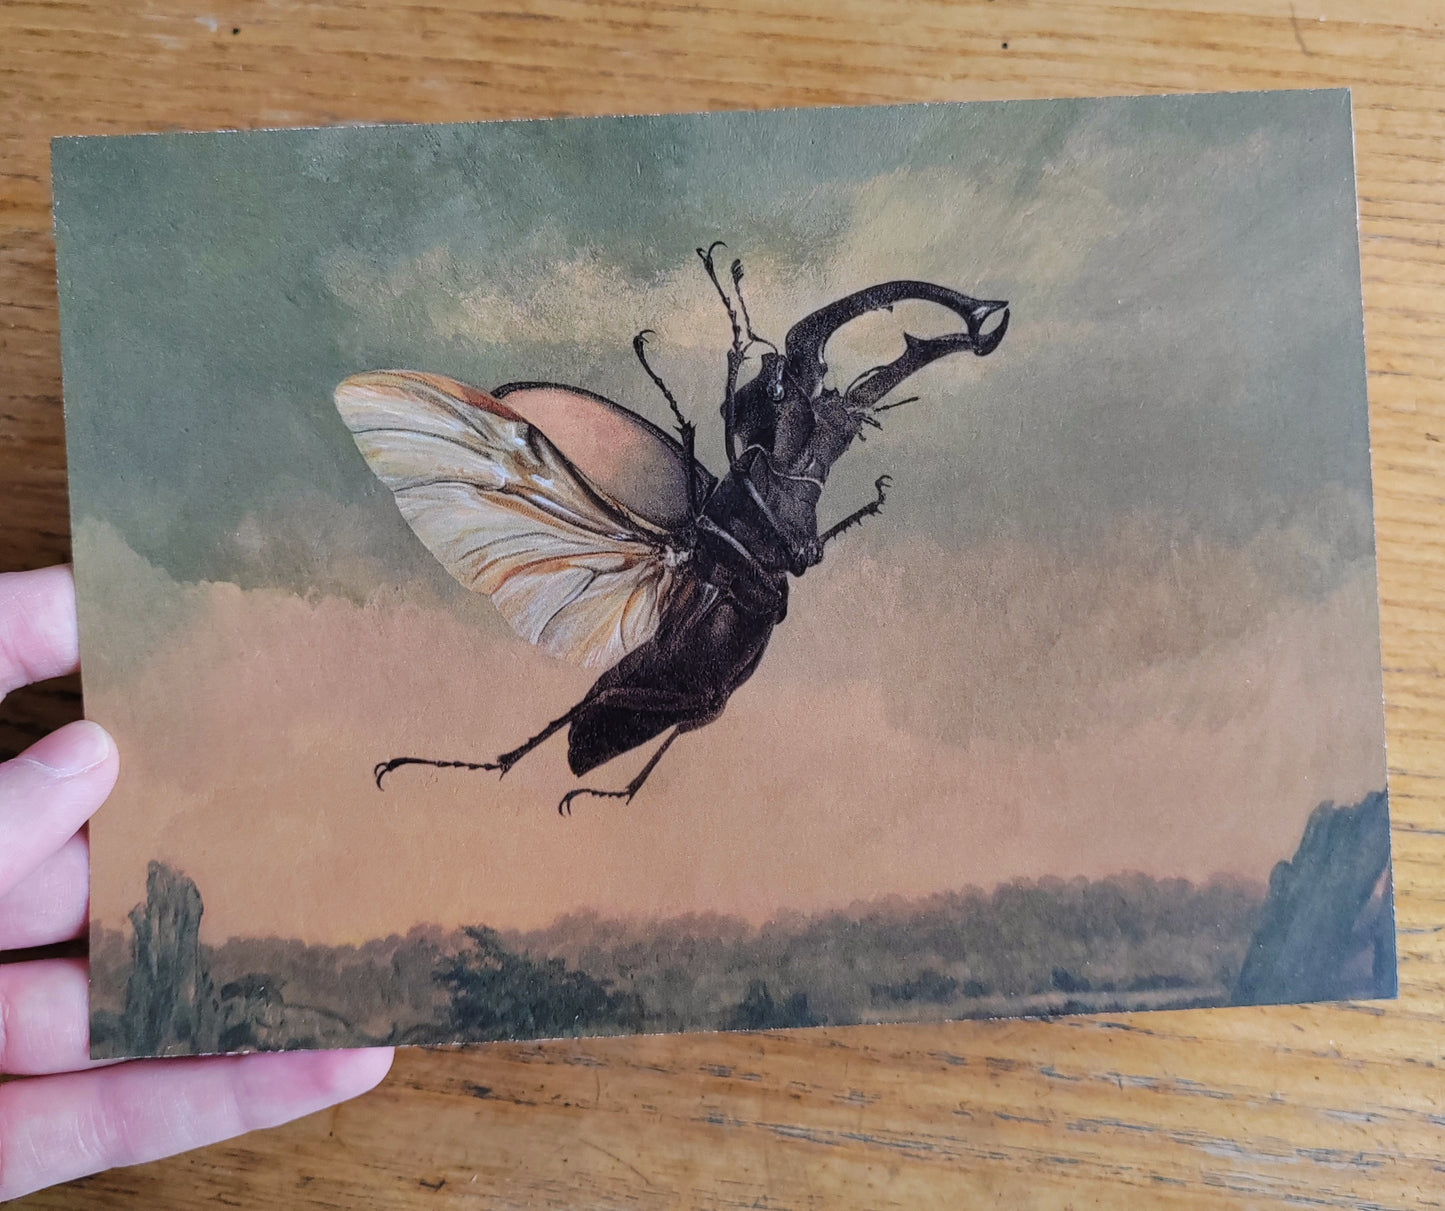 A5 size giant Postcard, Billywitch, flying stag beetle (Lucanus cervus)